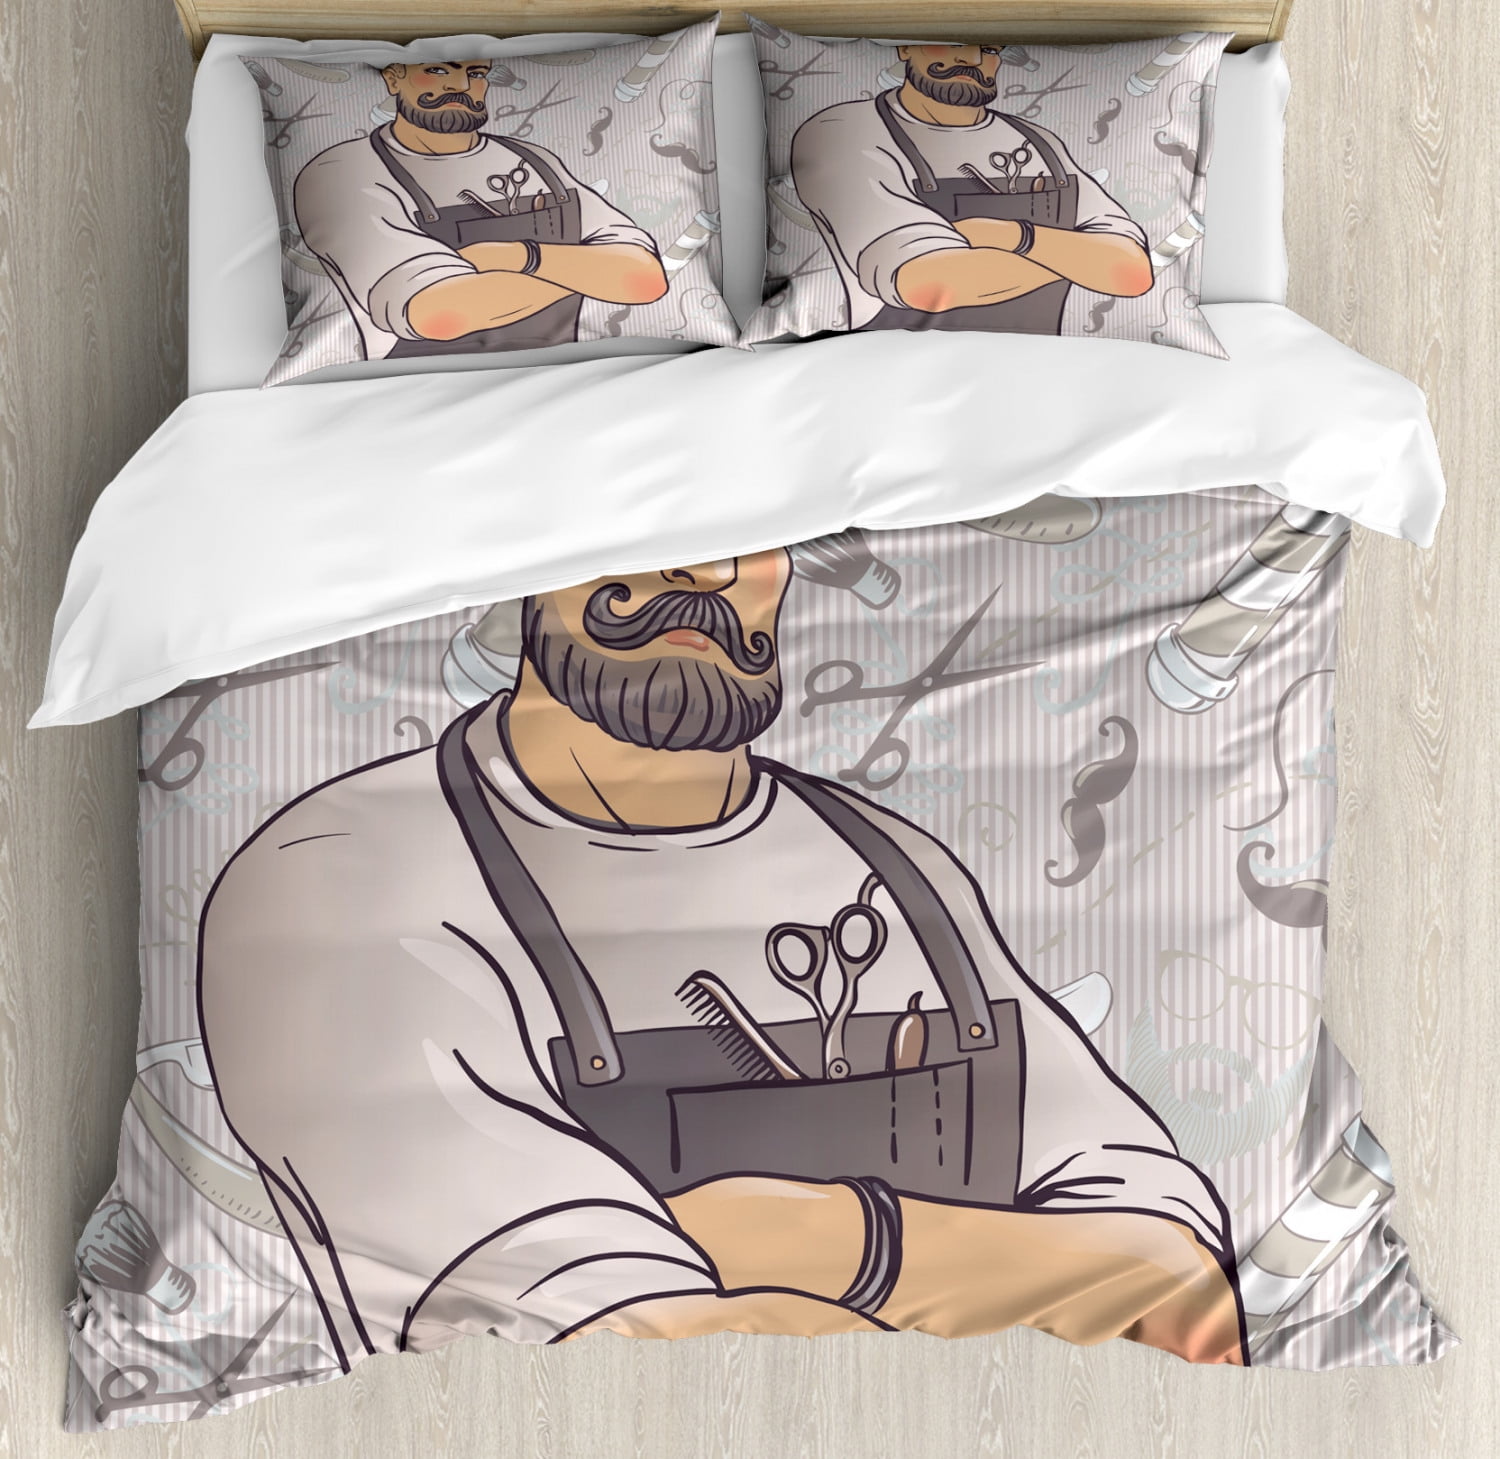 Hipster King Size Duvet Cover Set Muscular Barber Man With